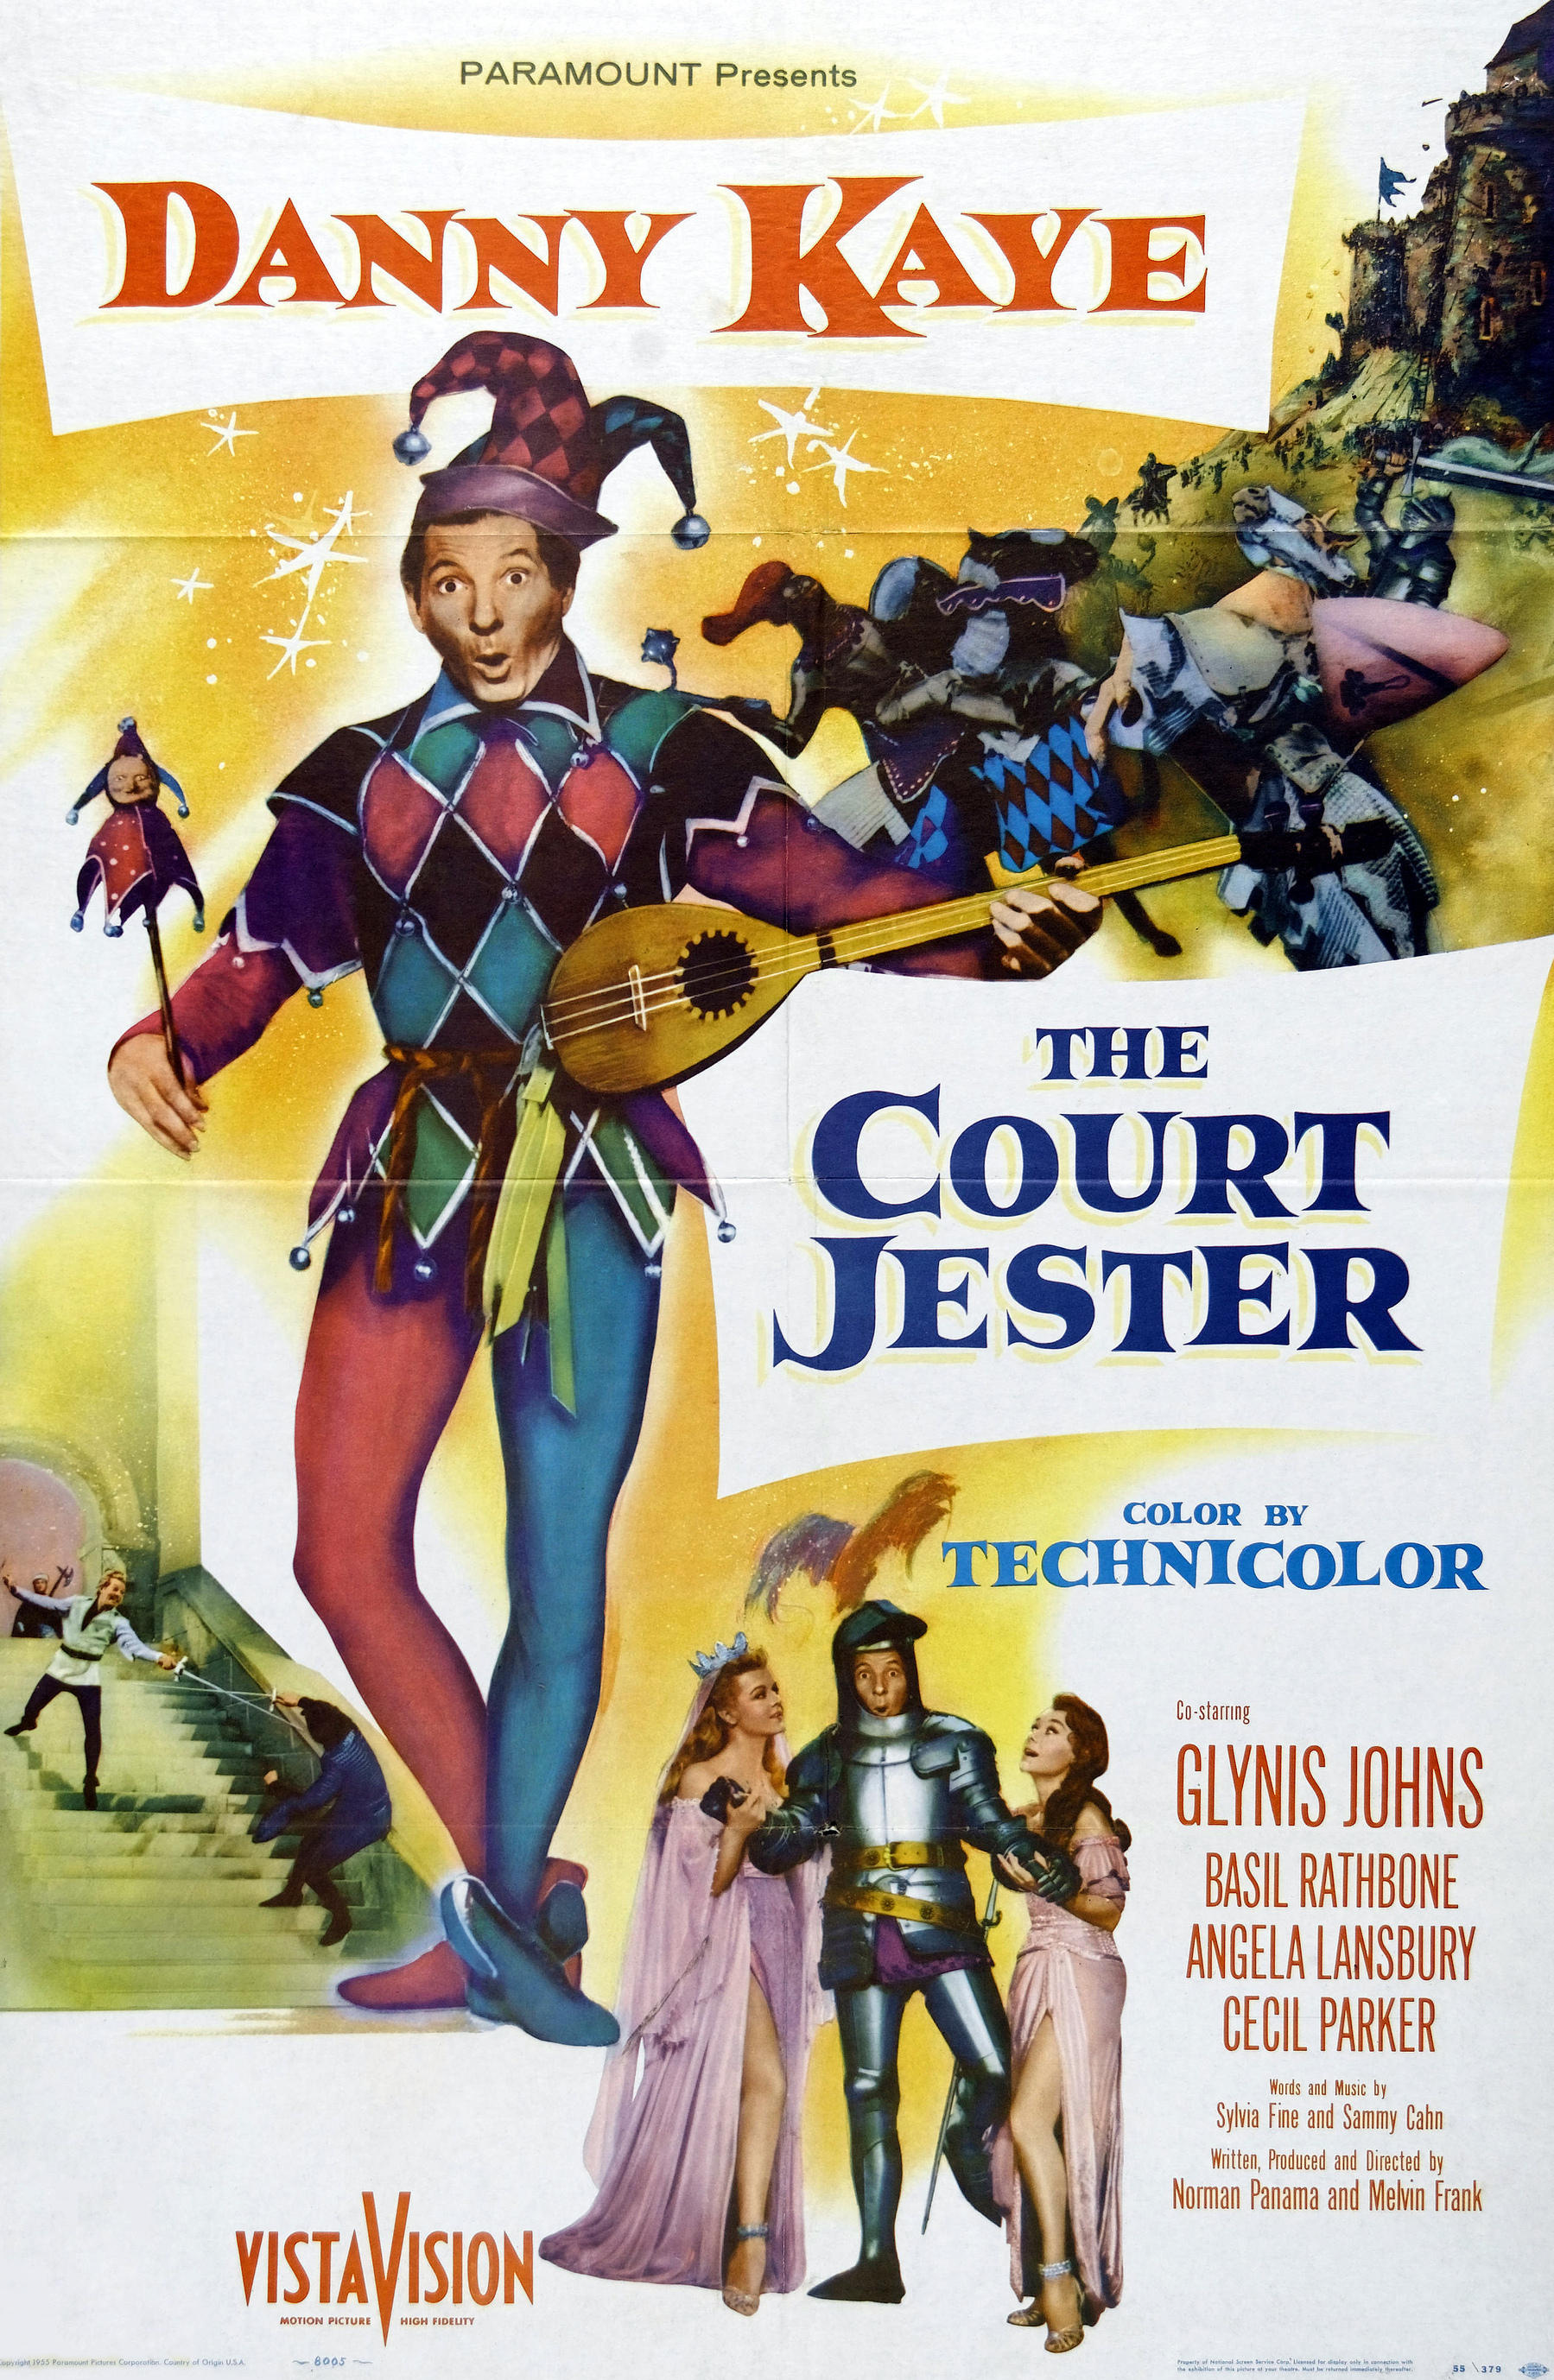 Movie poster: The Court Jester (1955).